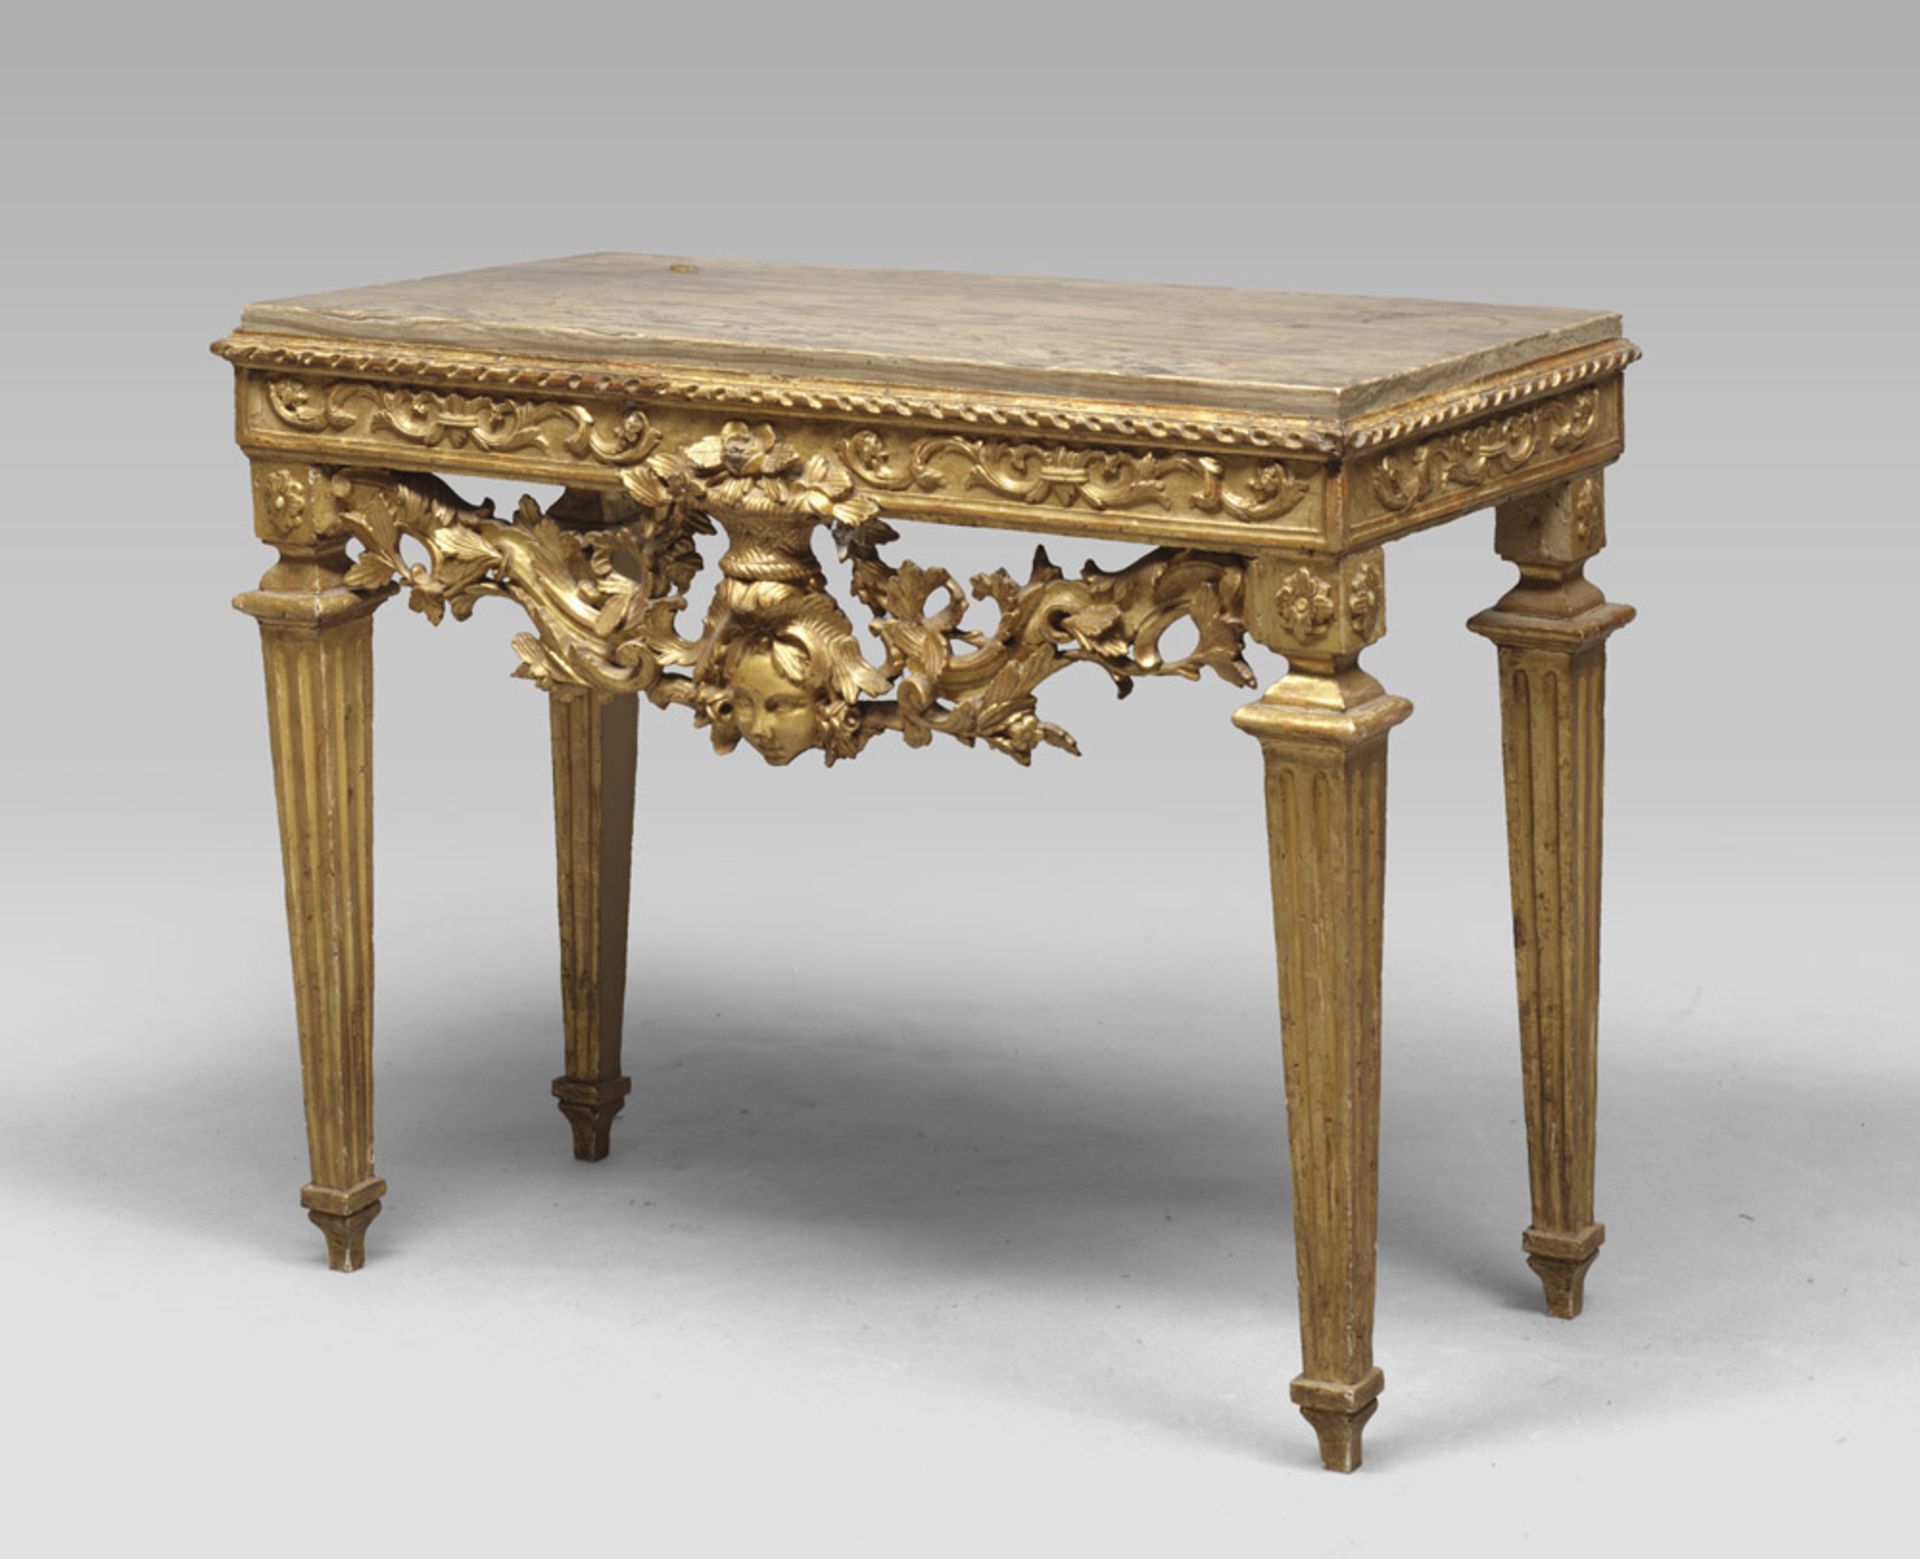 Small gold-plated console with veined Aquitania gray marble top, northern Italy, late 18th